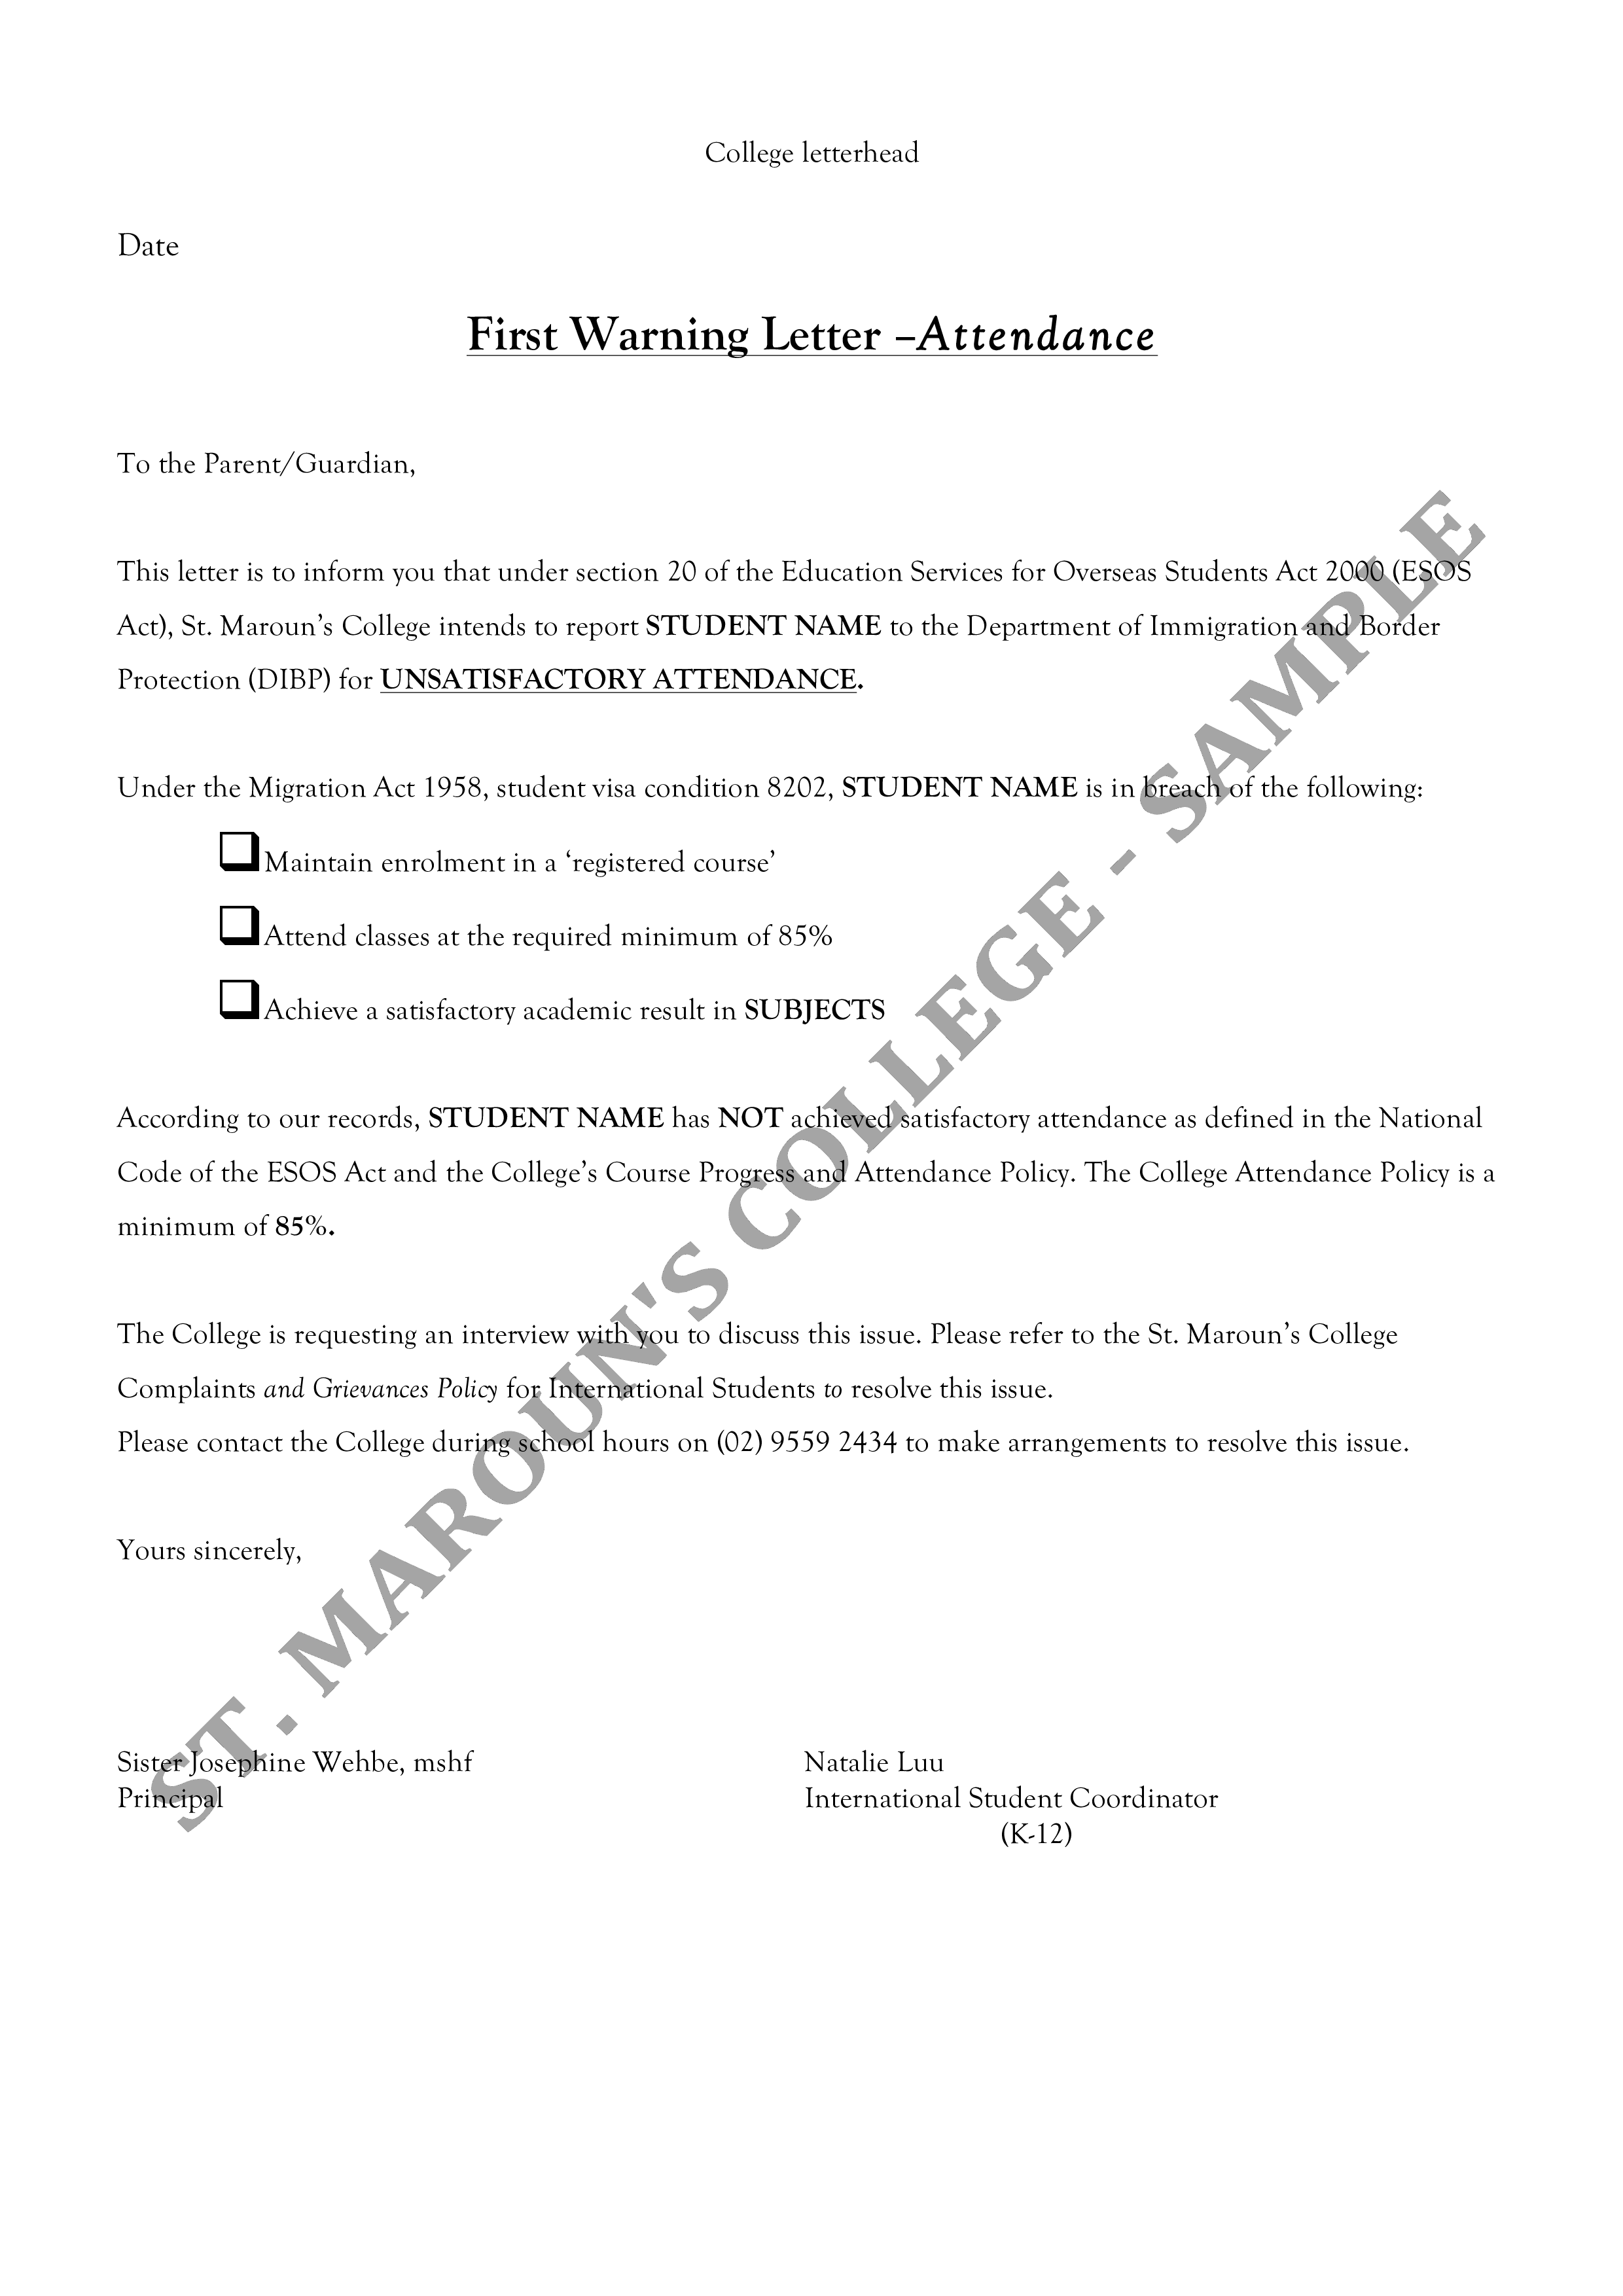 Student First Warning Letter main image